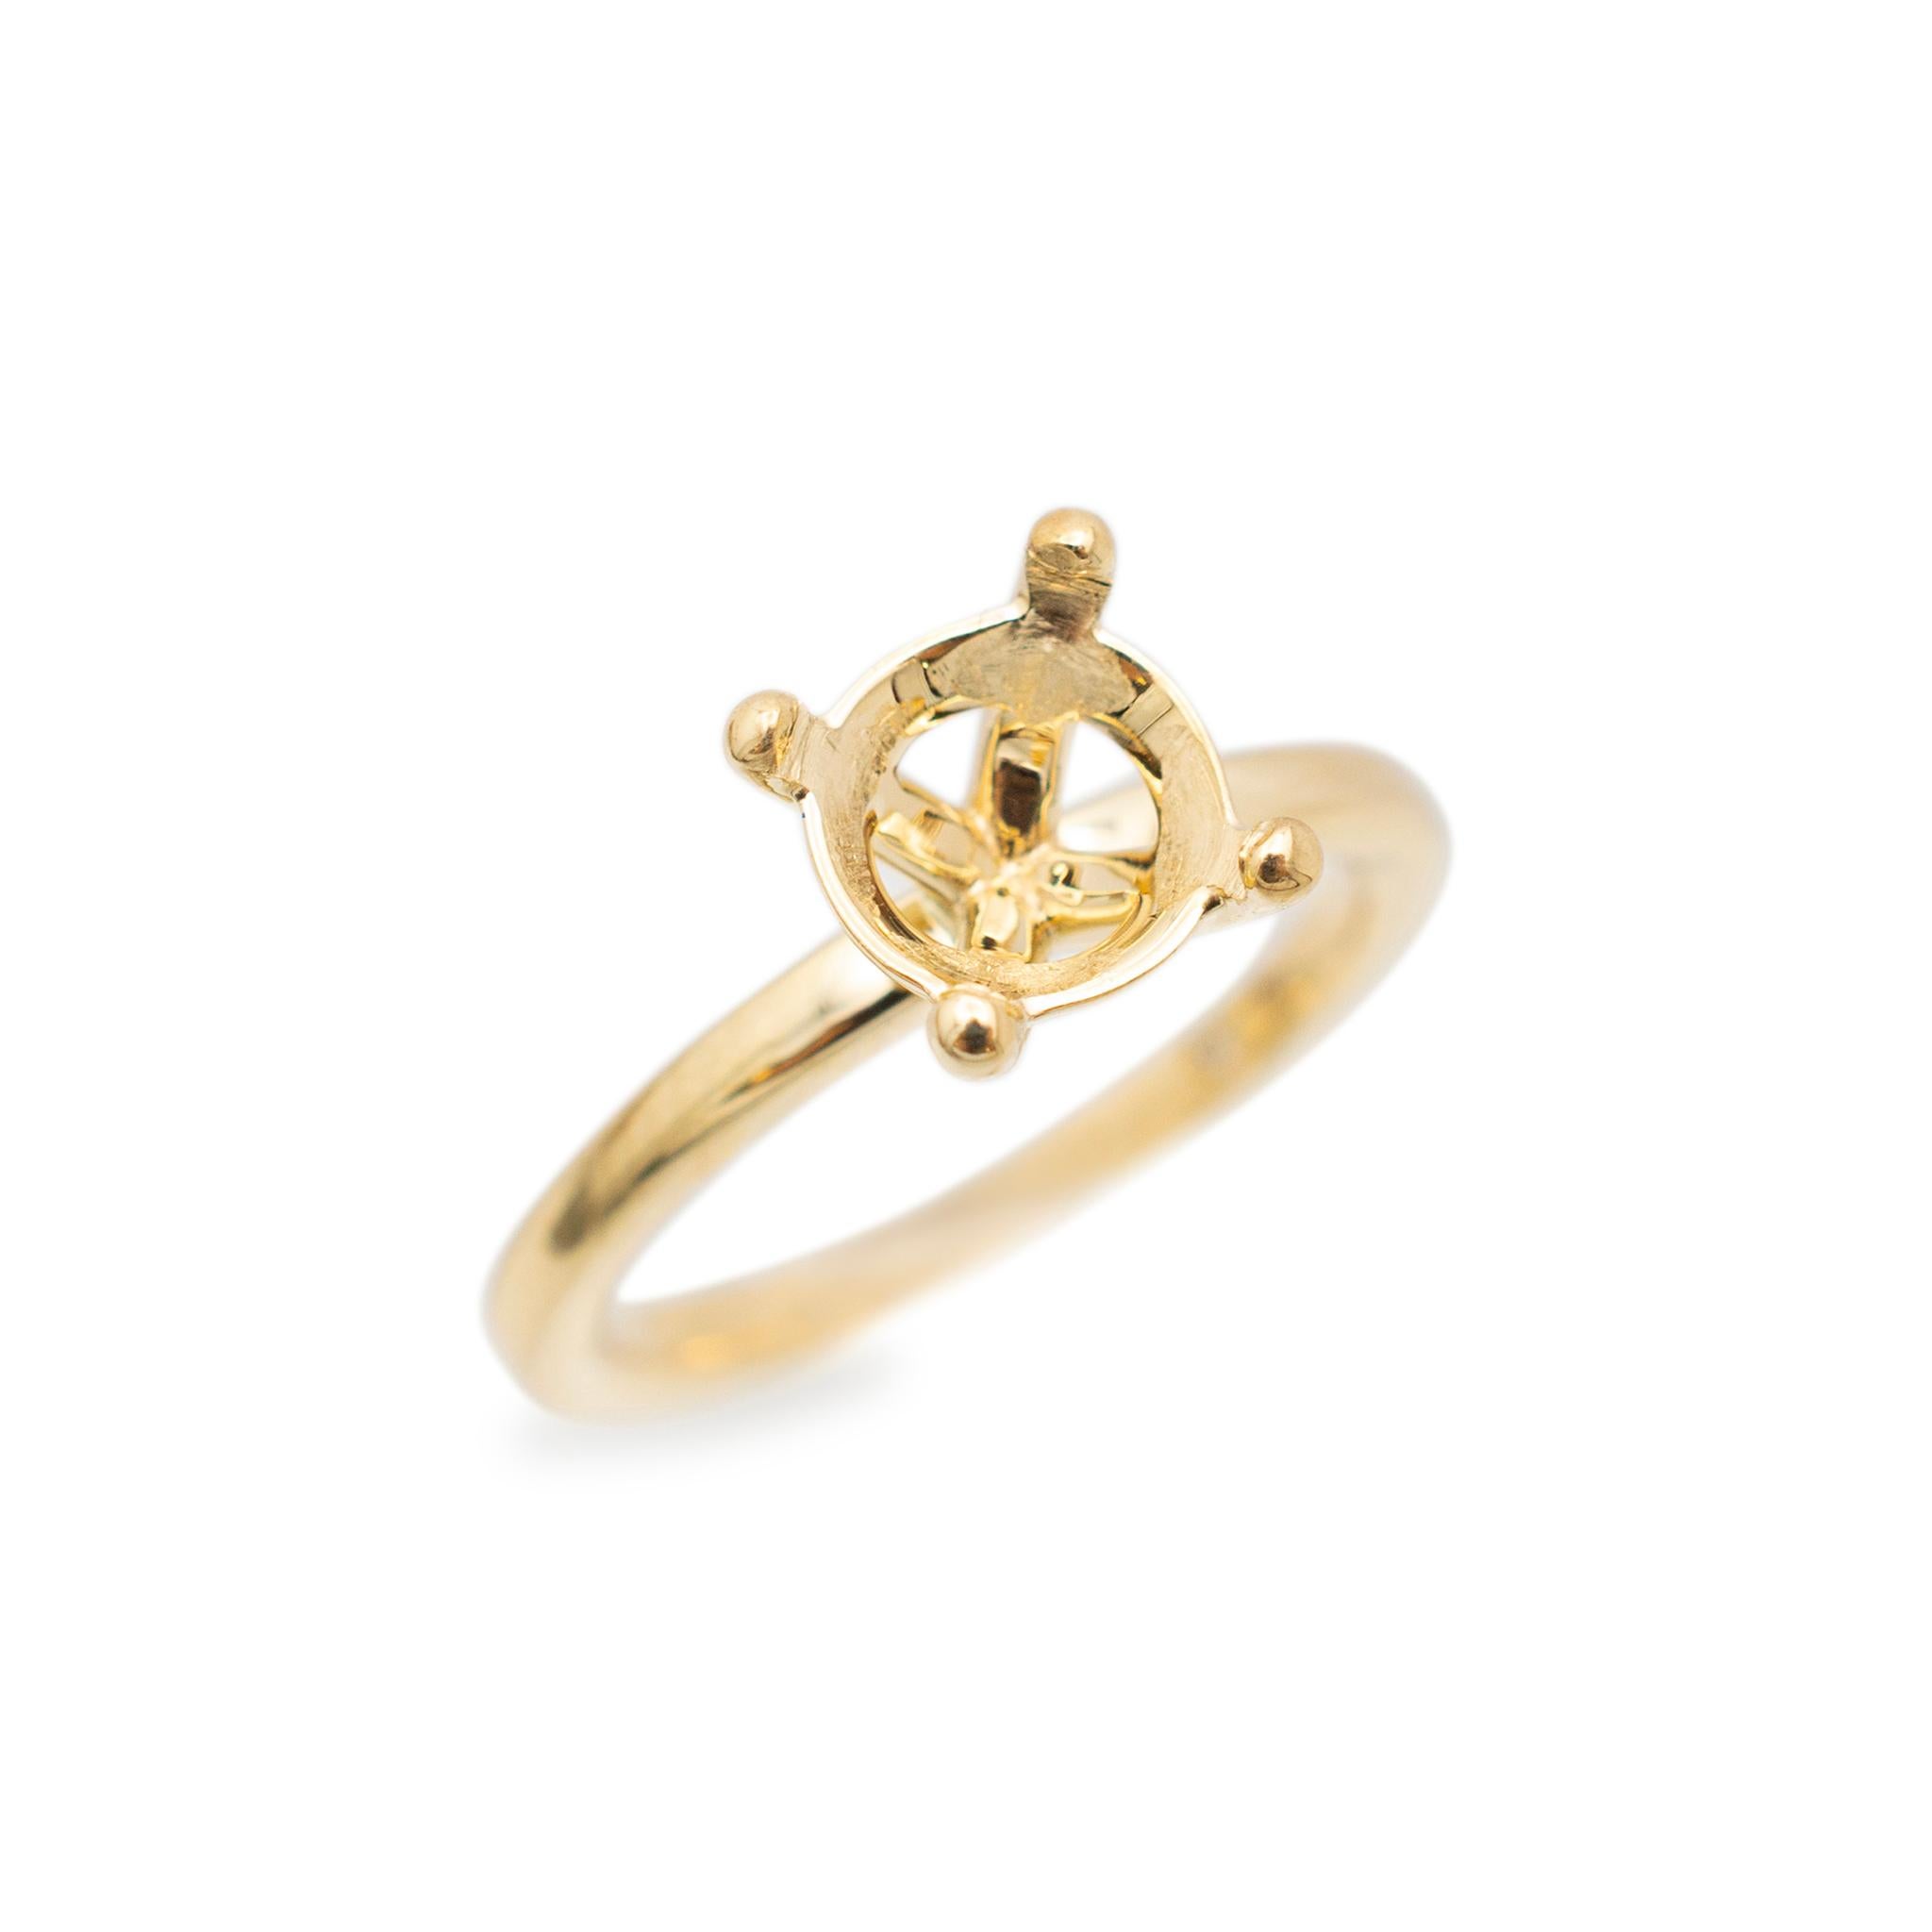 Gender: Ladies

Metal Type: 14K Yellow Gold

Size: 4

Shank Maximum Width: 1.90 mm

Weight: 2.64 grams

Ladies 14K yellow gold solitaire engagement semi-mount ring with a half round shank. The metal was tested and determined to be 14K yellow gold.